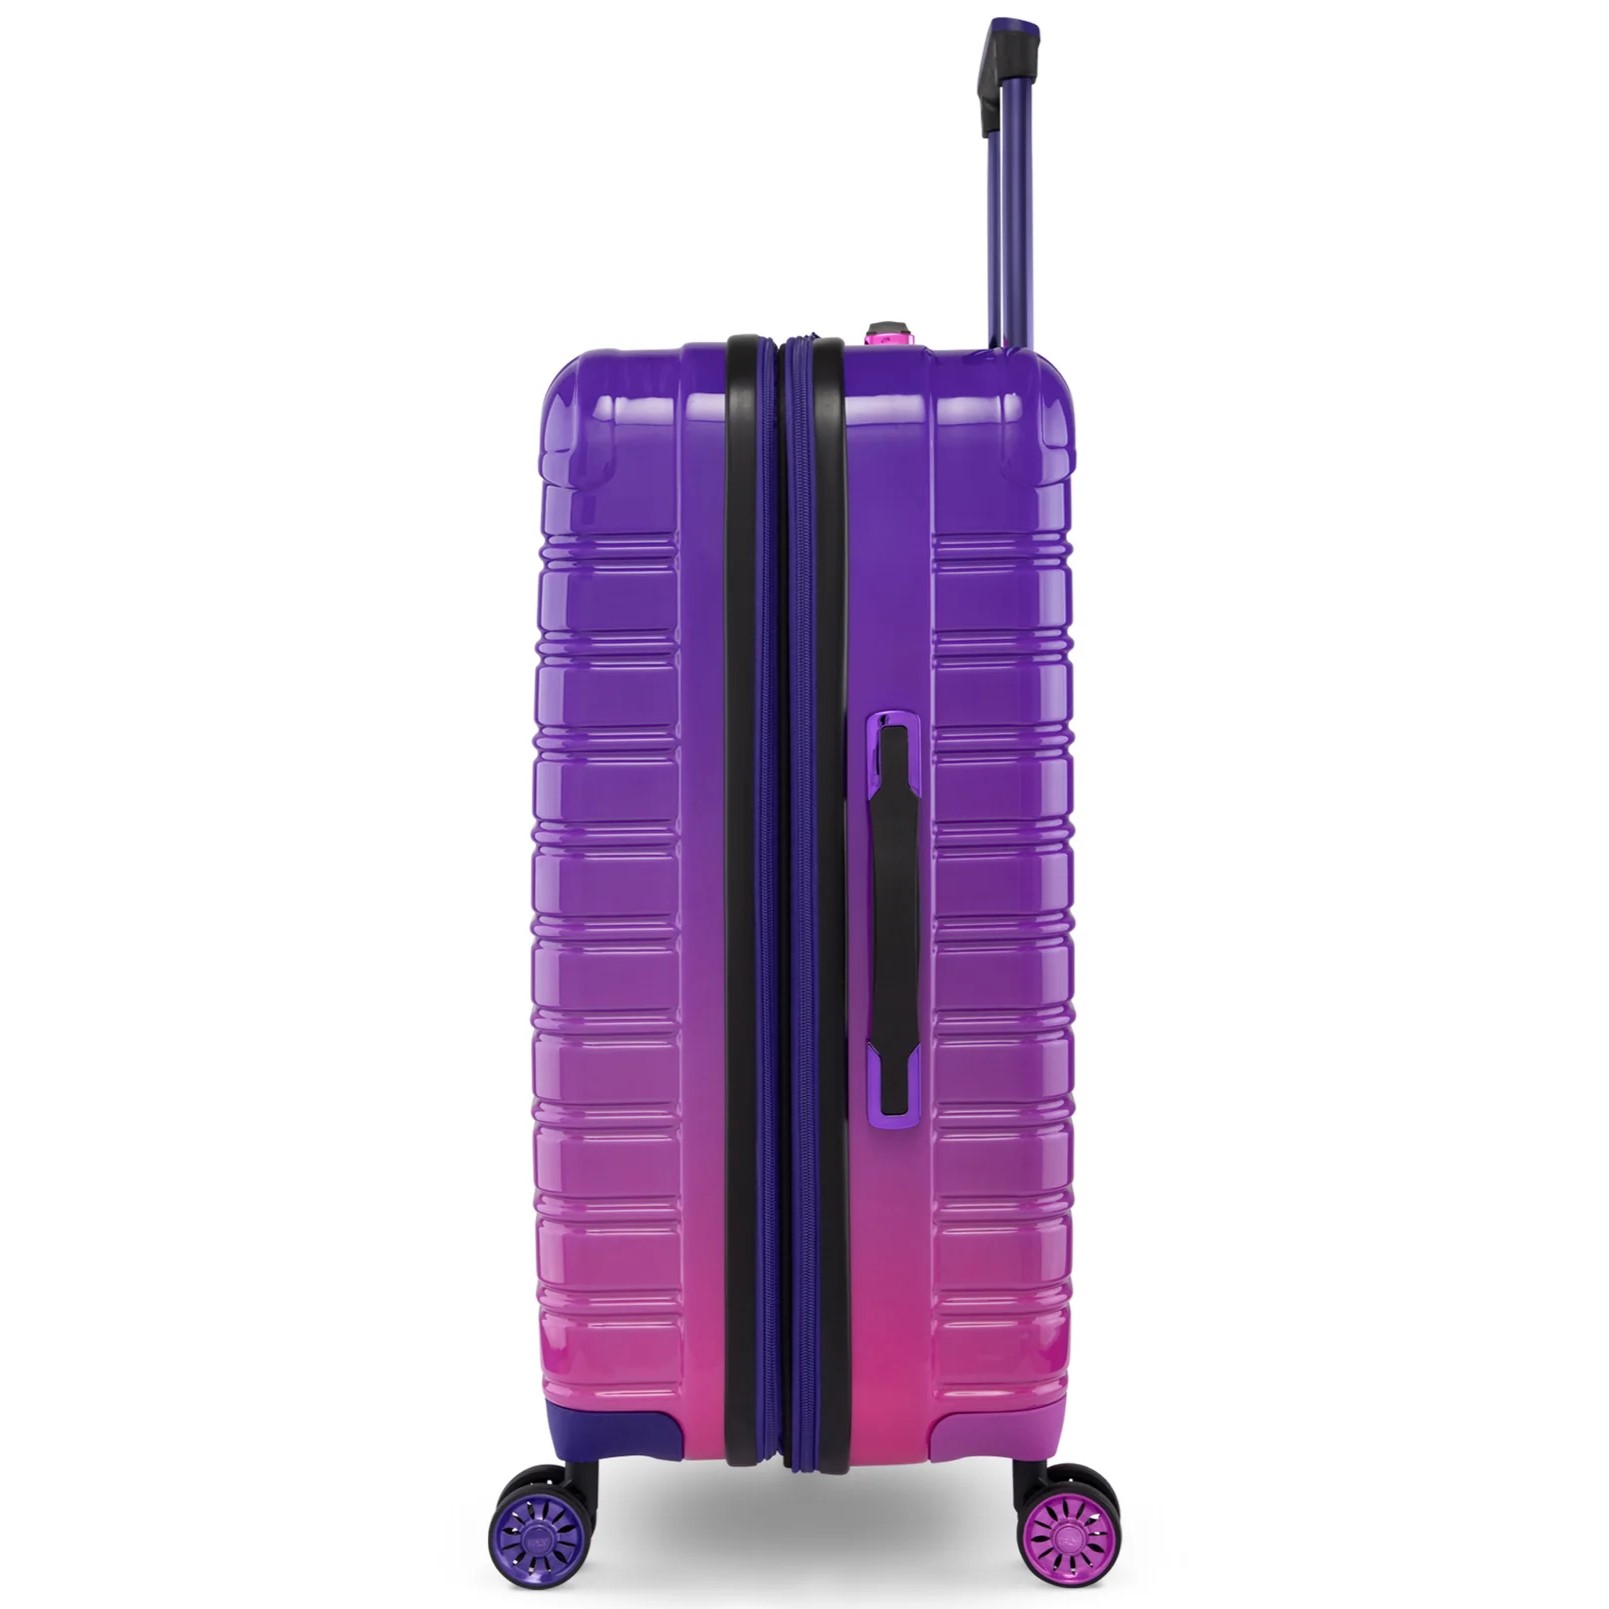 VALI MÀU TÍM LOANG DU LỊCH IFLY FIBERTECH OMBRE HARDSIDE LUGGAGE IN MIDNIGHT BERRY 6